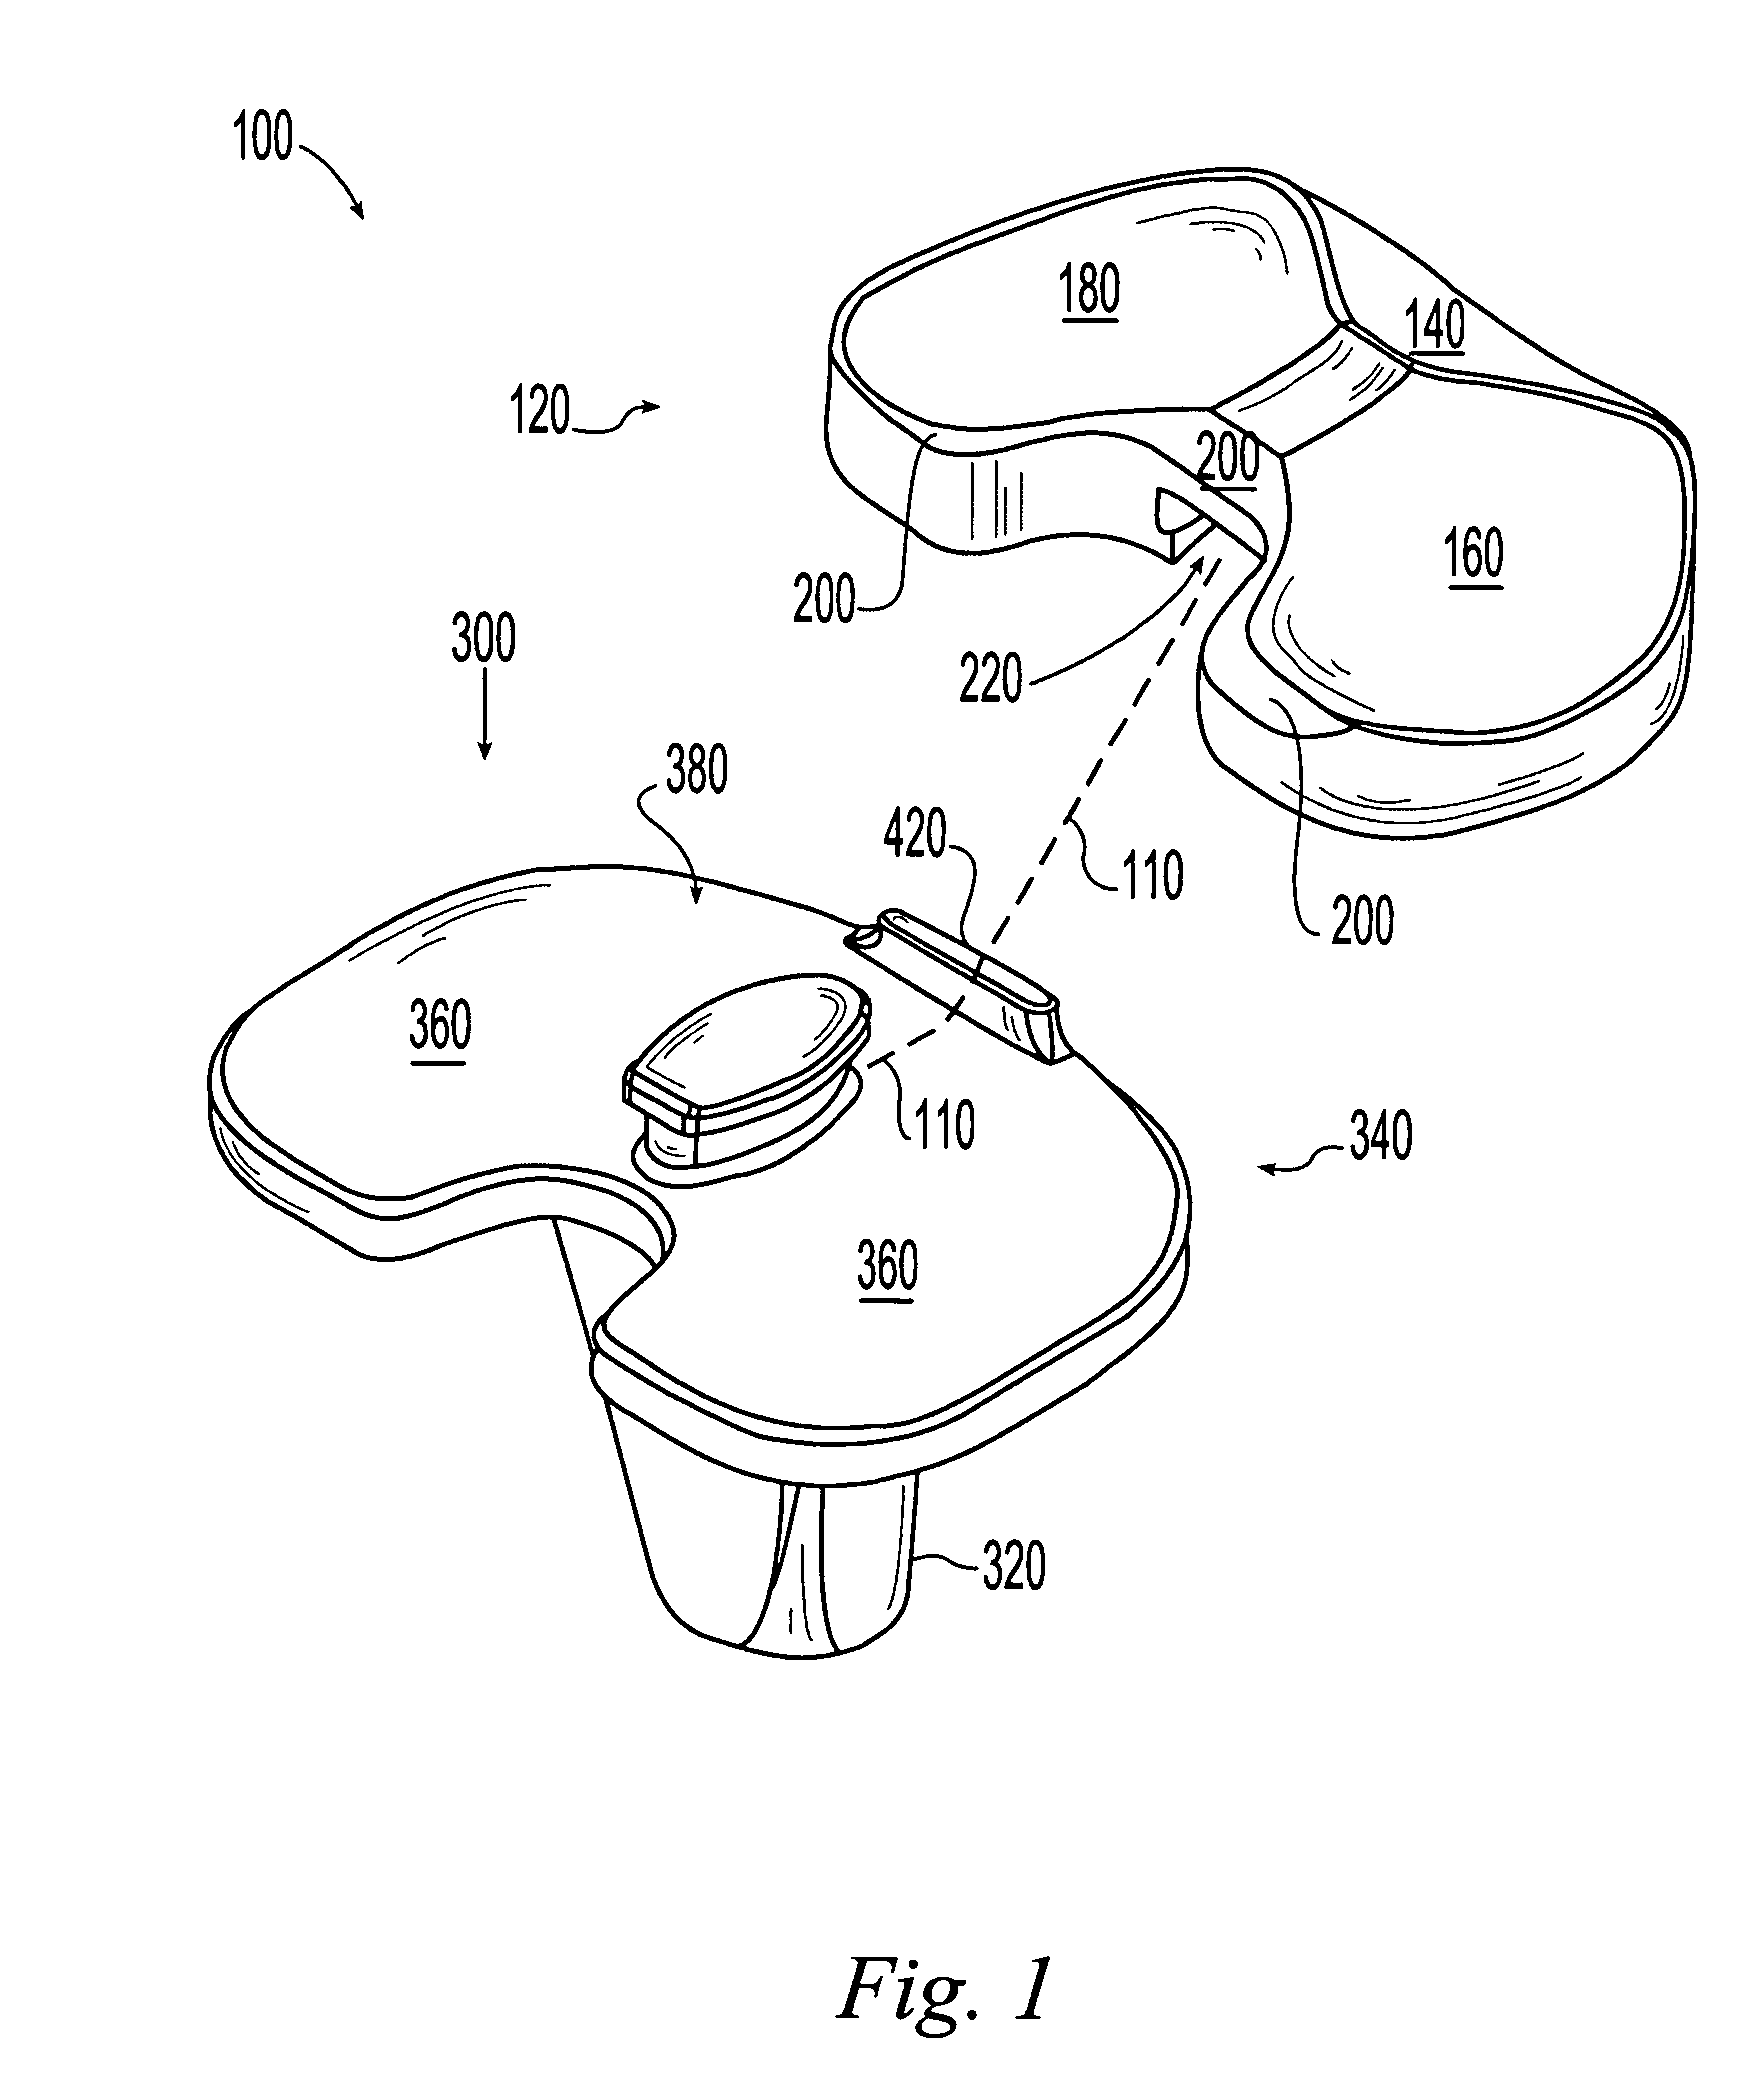 Tibial knee component with a mobile bearing